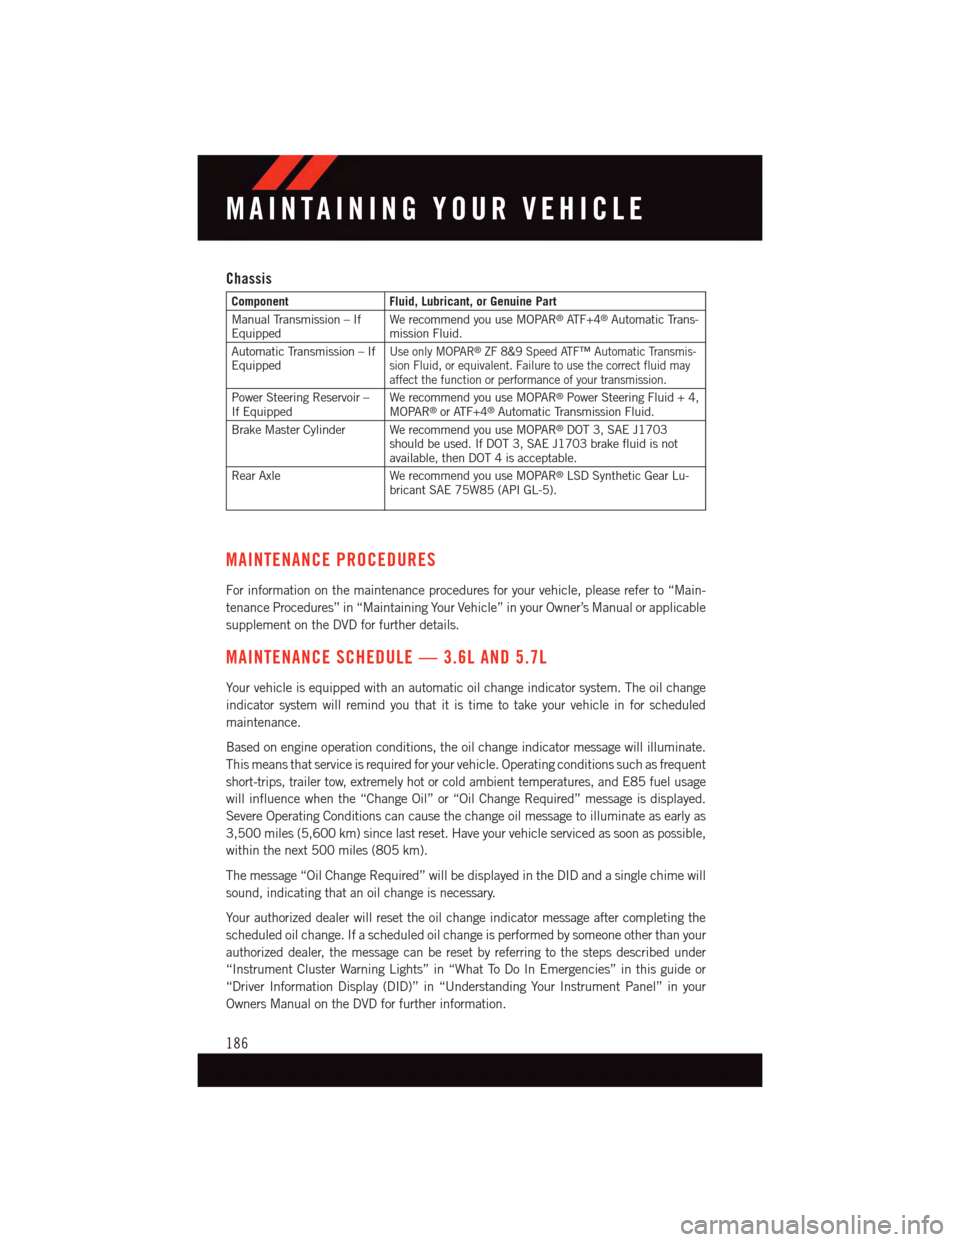 DODGE CHALLENGER 2015 3.G User Guide Chassis
ComponentFluid, Lubricant, or Genuine Part
Manual Transmission – IfEquippedWe recommend you use MOPAR®AT F + 4®Automatic Trans-mission Fluid.
Automatic Transmission – IfEquippedUse only 